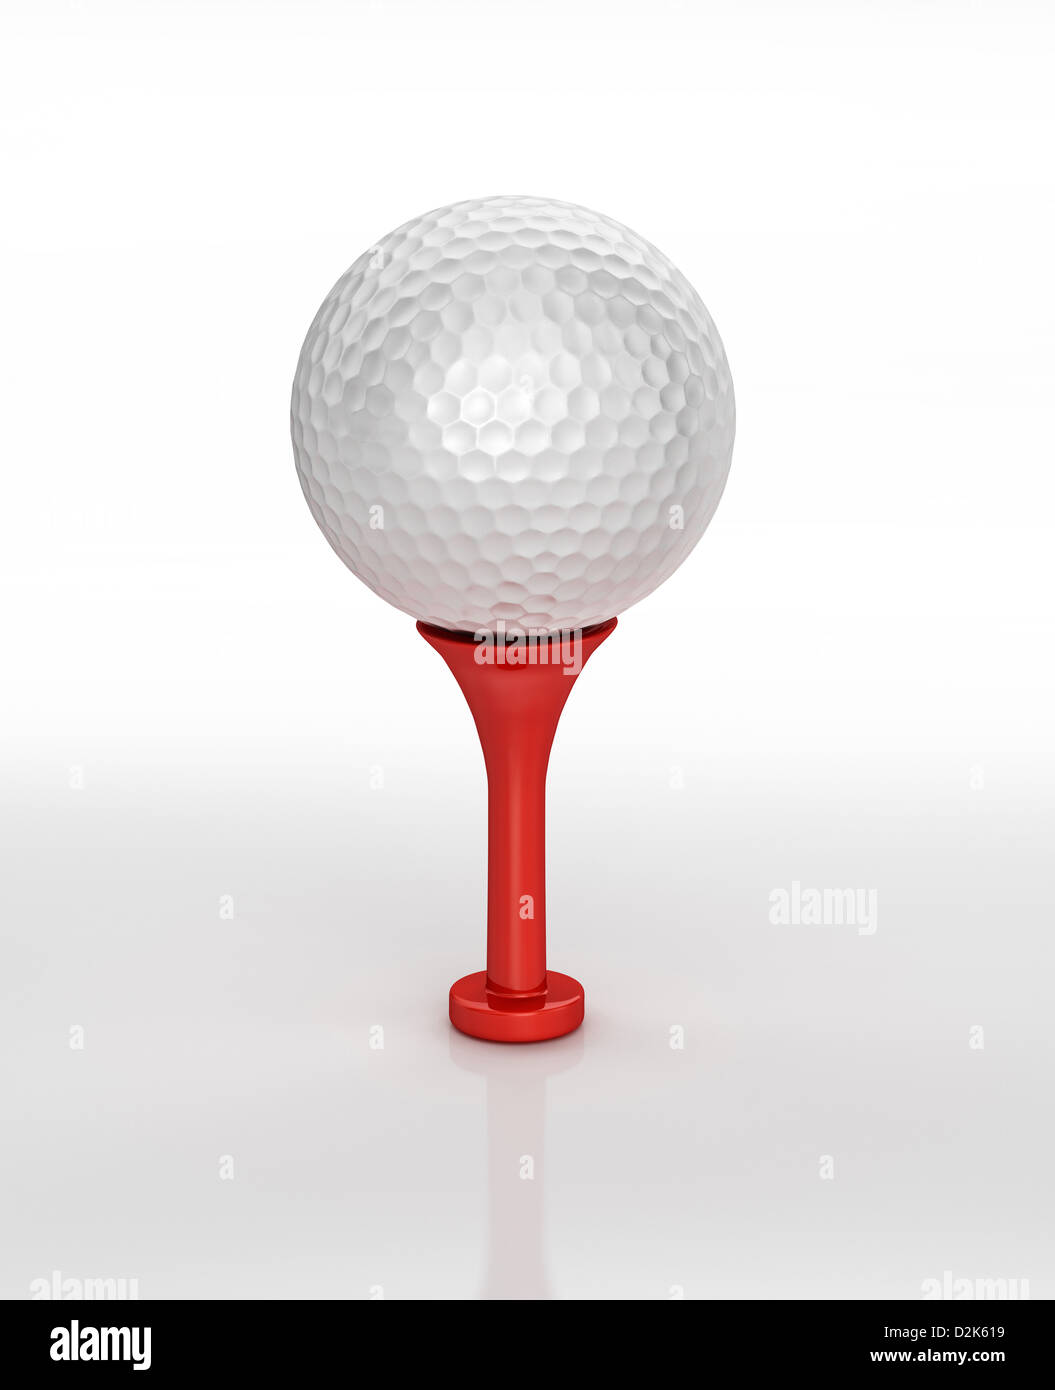 3D digital rendering of a Golf ball placed on tee, on white surface, with clipping path. Stock Photo